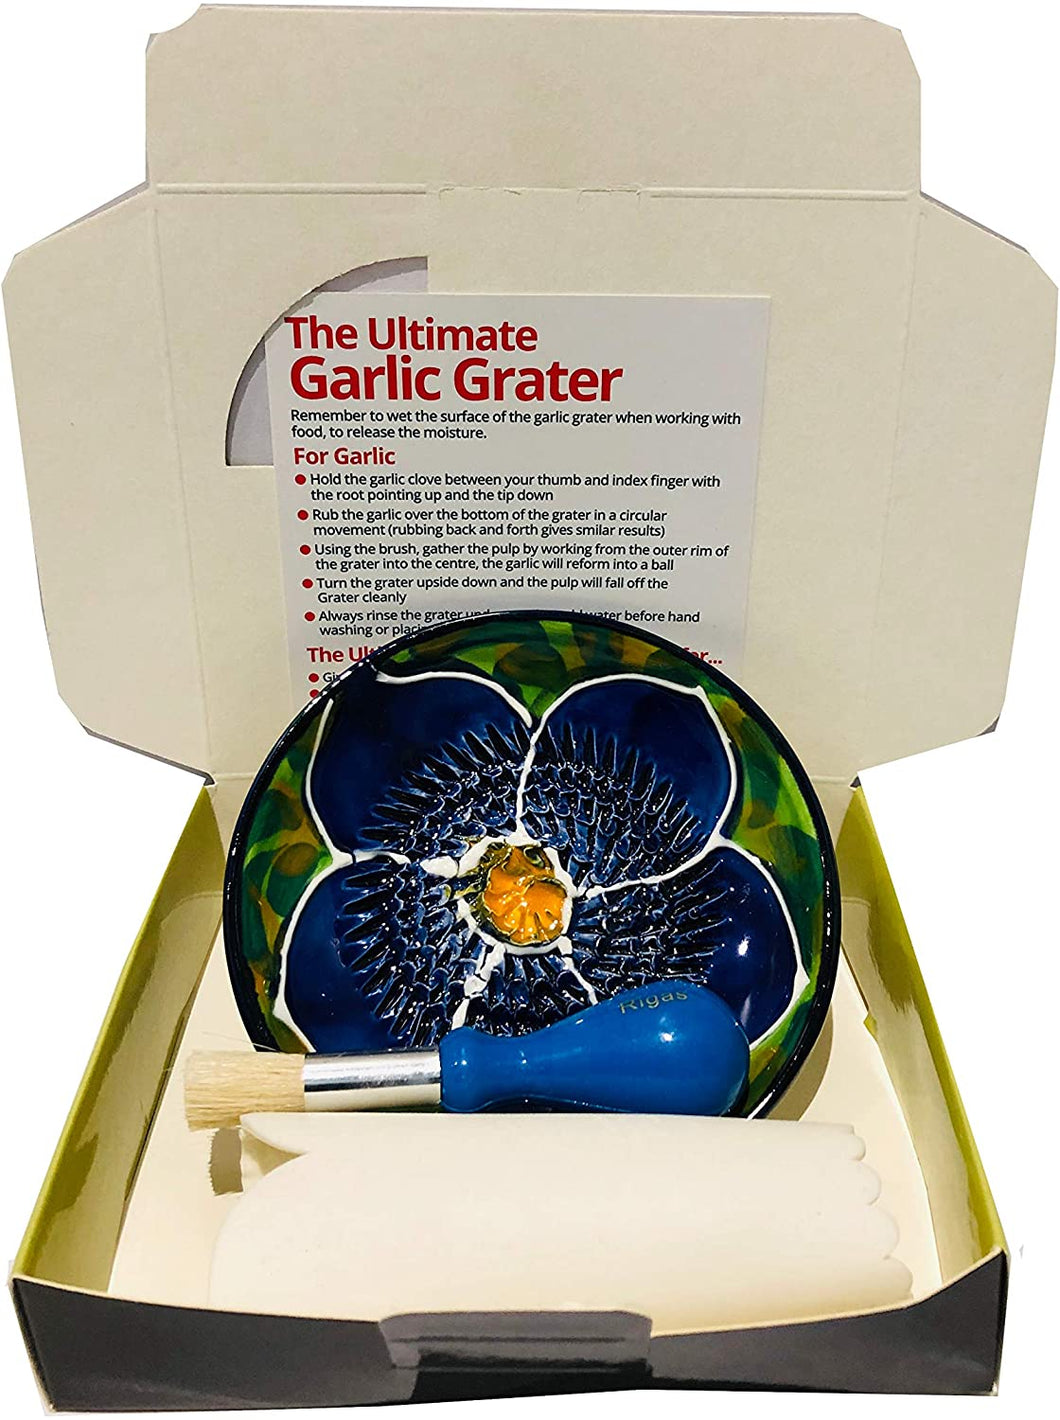 Blue Pom Design Garlic Grater(14) Garlic and Ginger Grater Set with Brush and Peeler. A Must for Every Foodie who Loves to Cook.